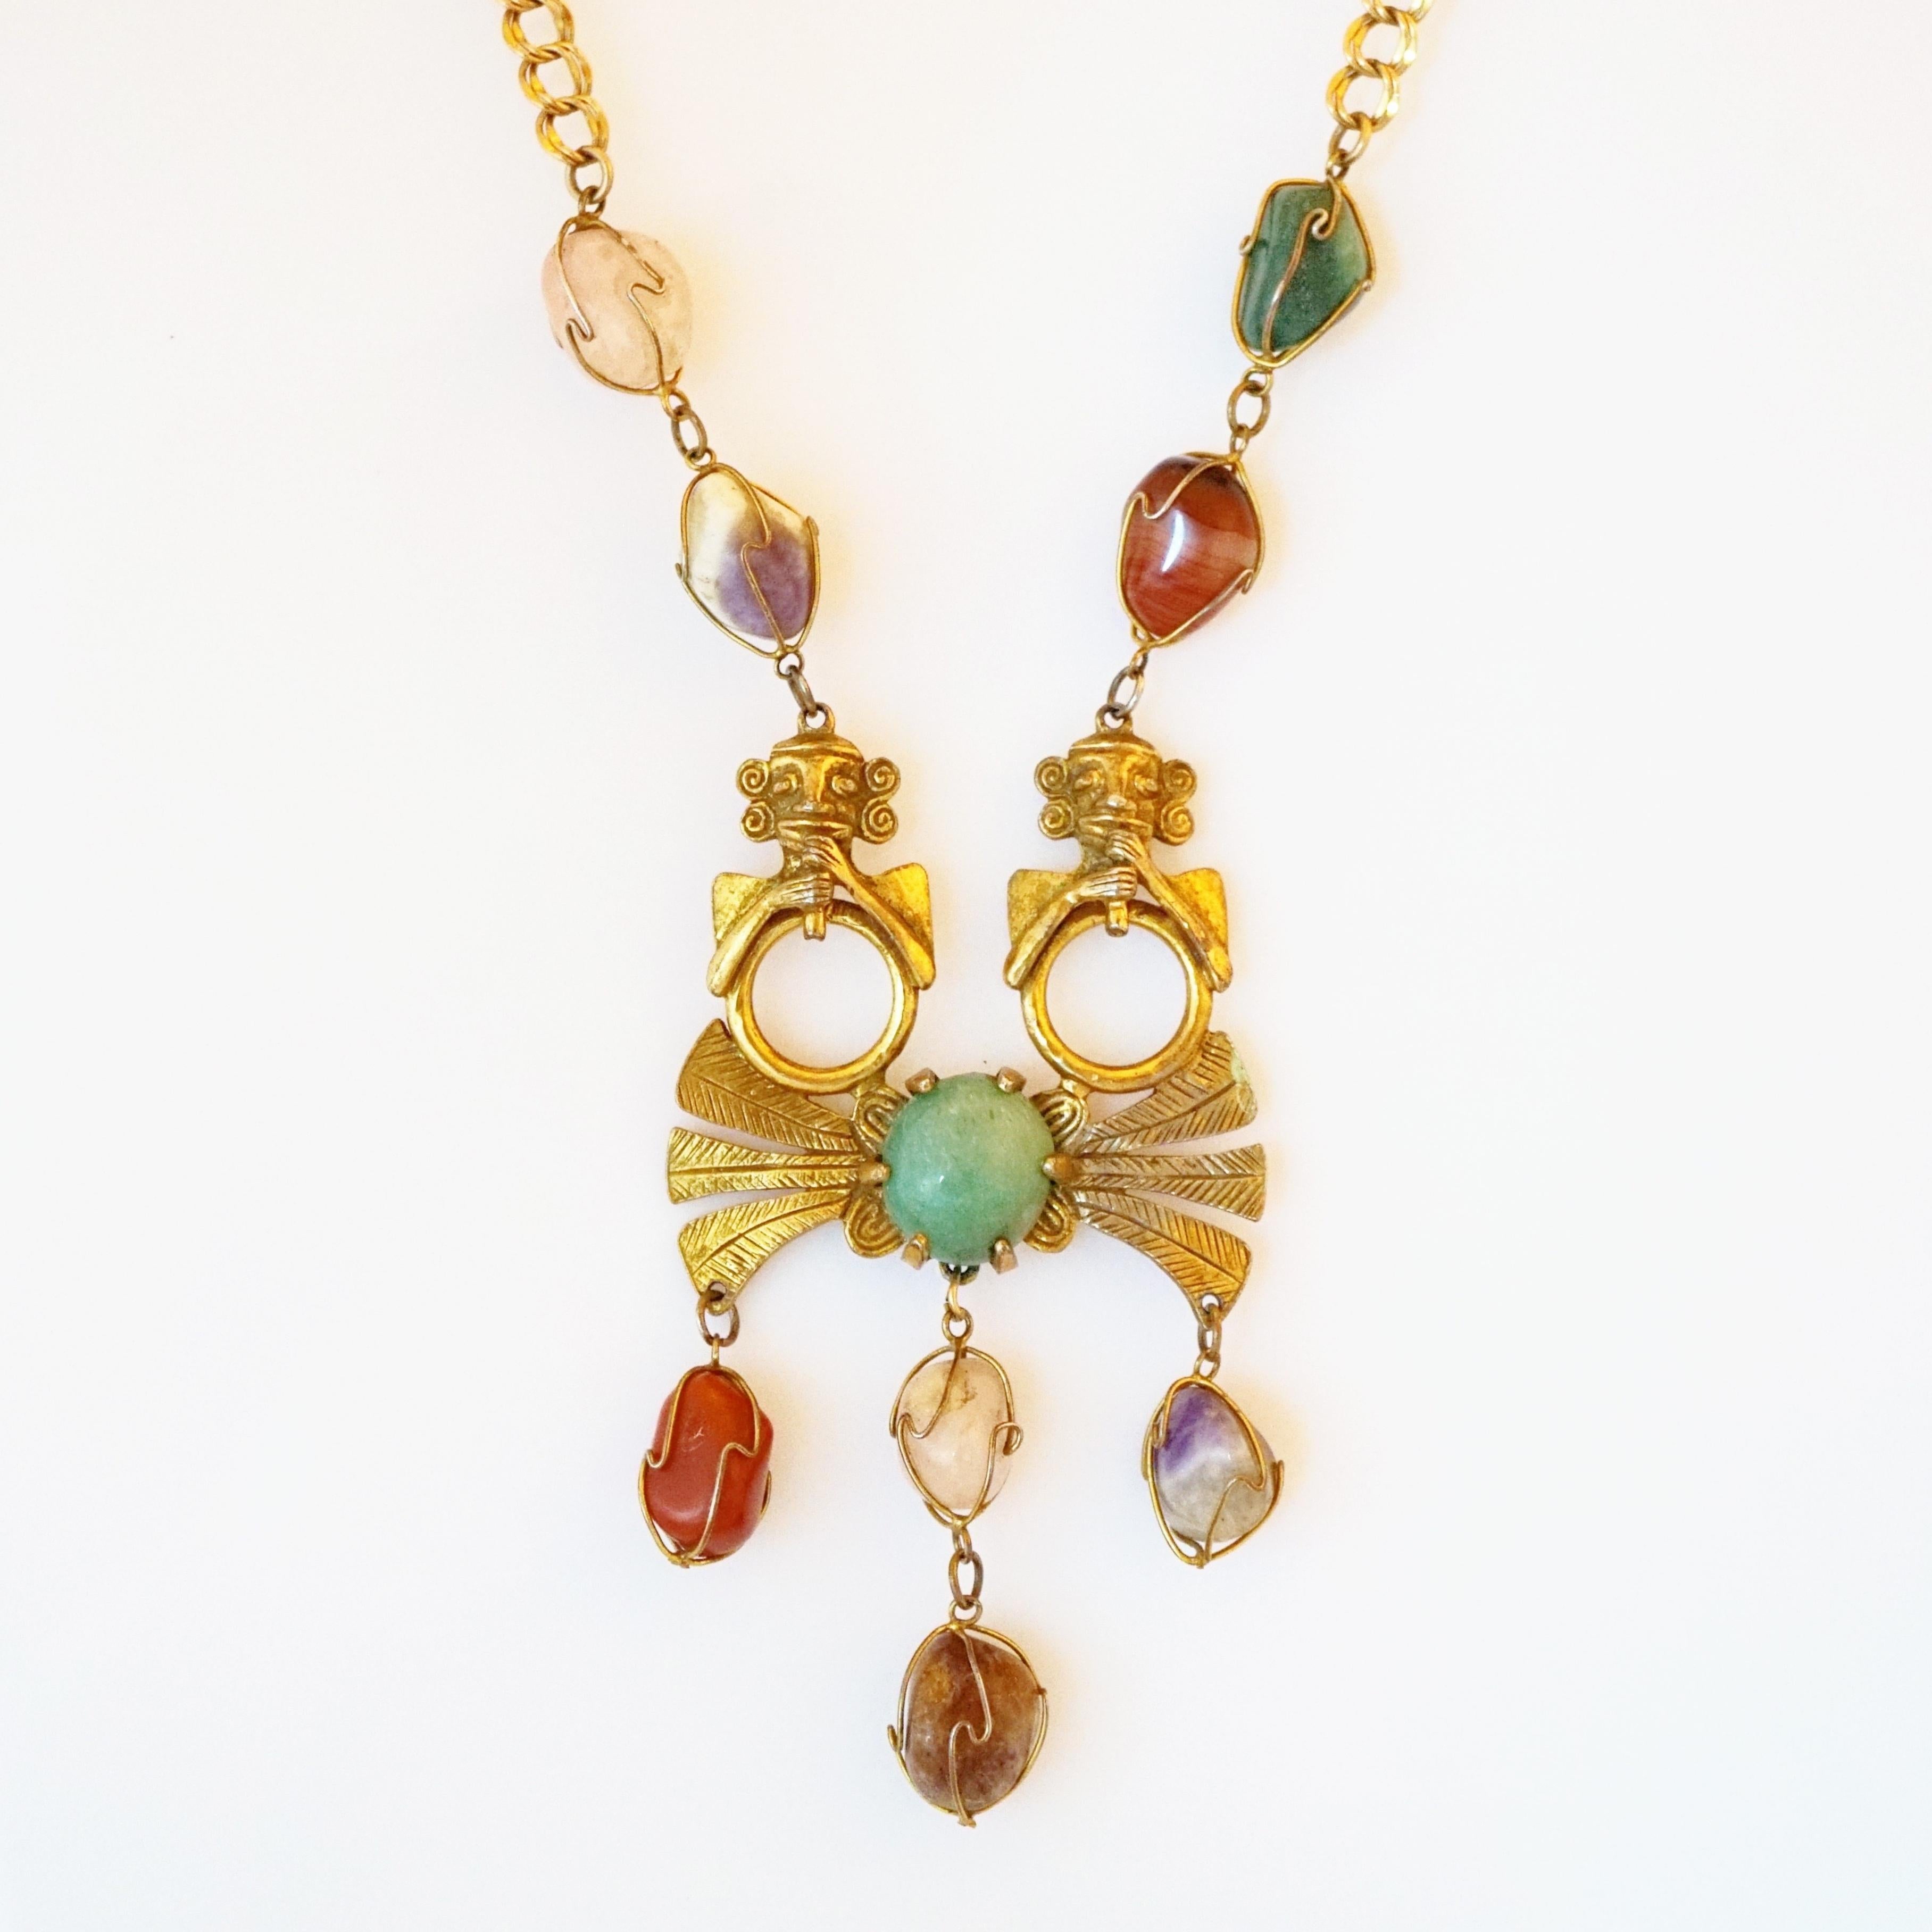 Modern Mayan Statement Necklace With Caged Gems By Larry Vrba For Castlecliff, 1970s For Sale